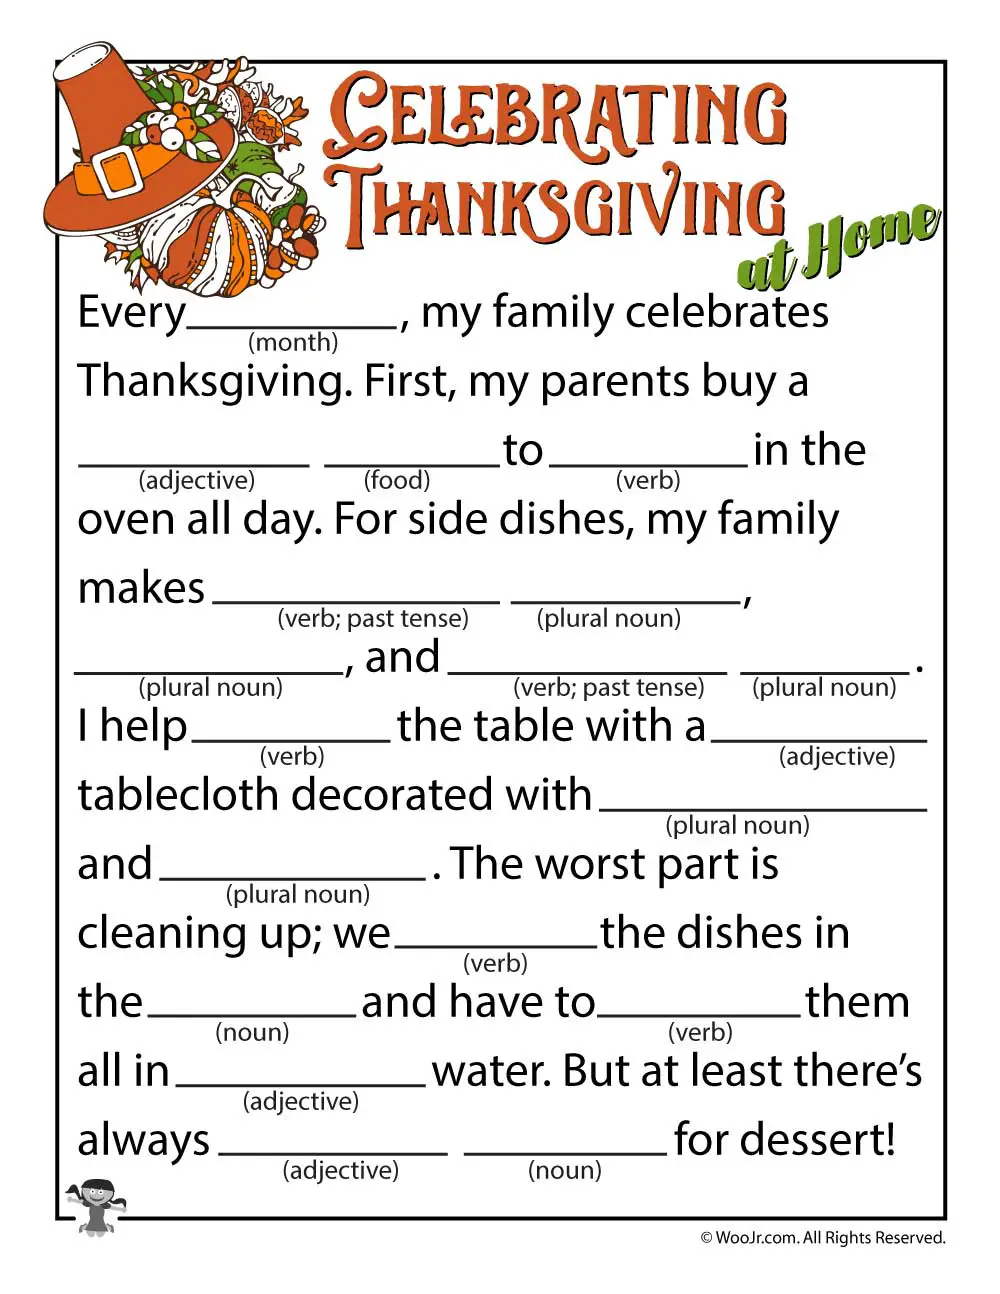 12 Funny Thanksgiving Mad Libs for All Kitty Baby Love